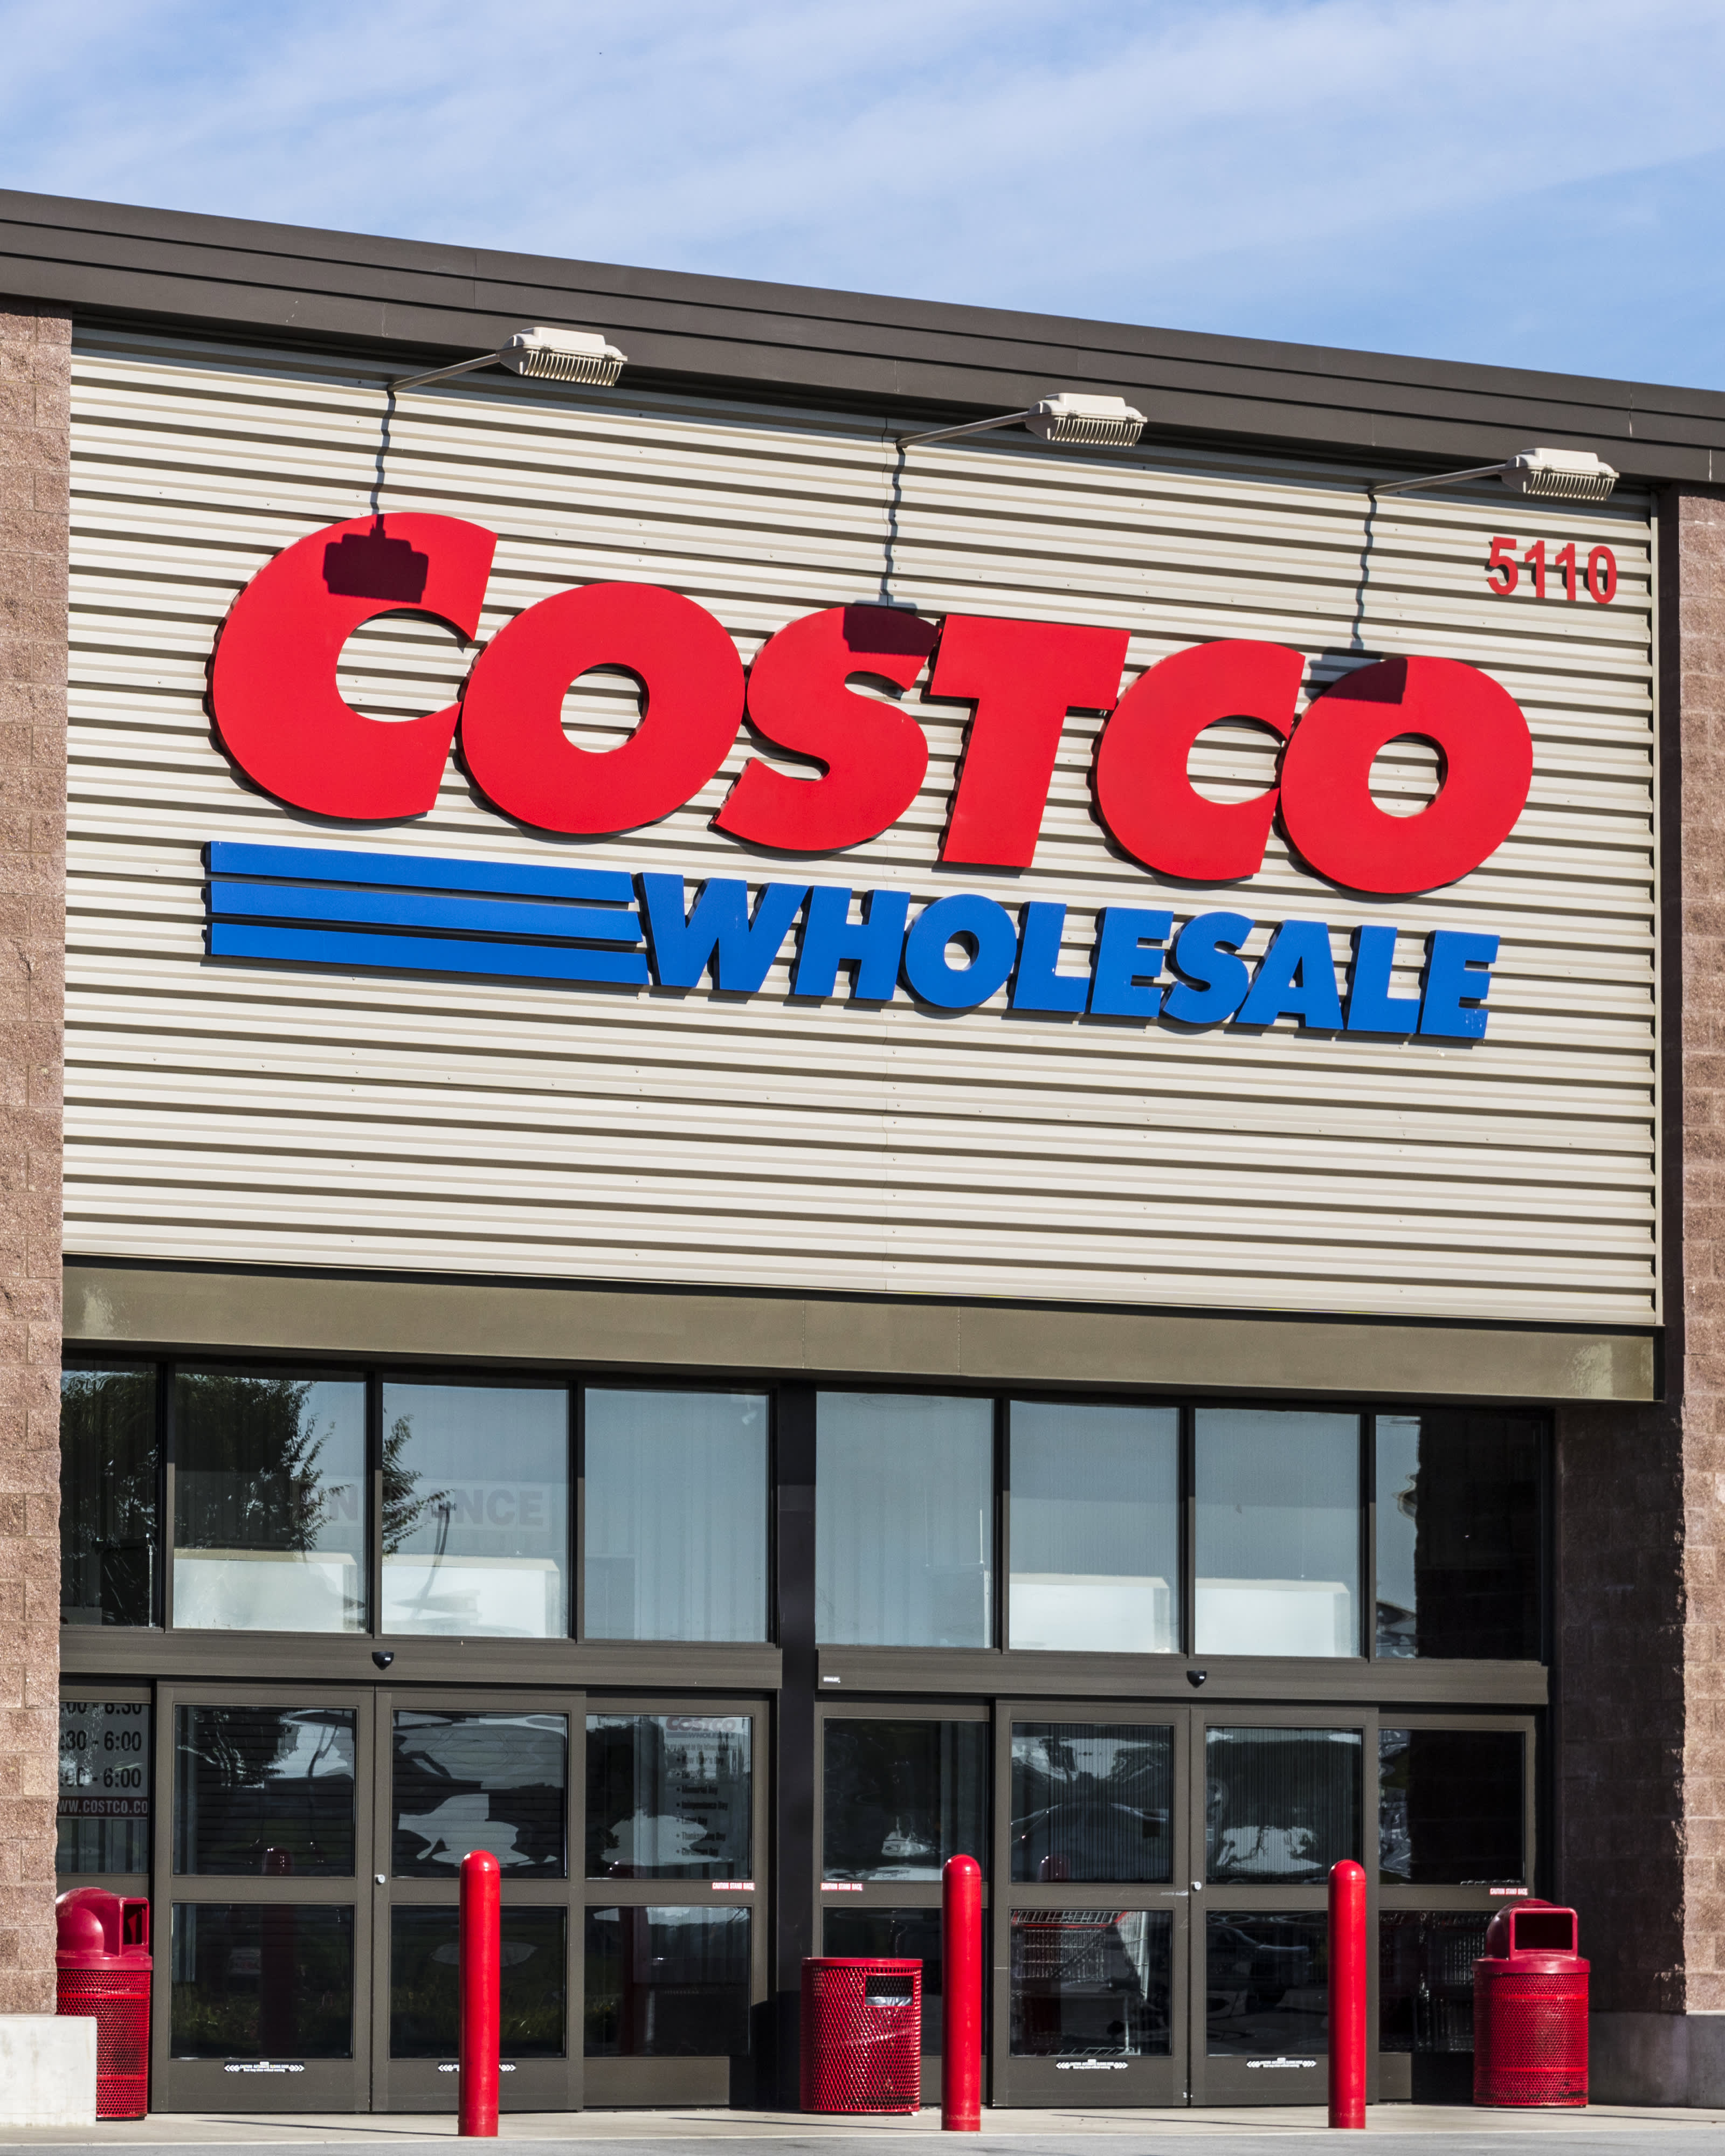 Costco Is Selling a Ceramic Pan That's Like a Caraway Alternative – SheKnows